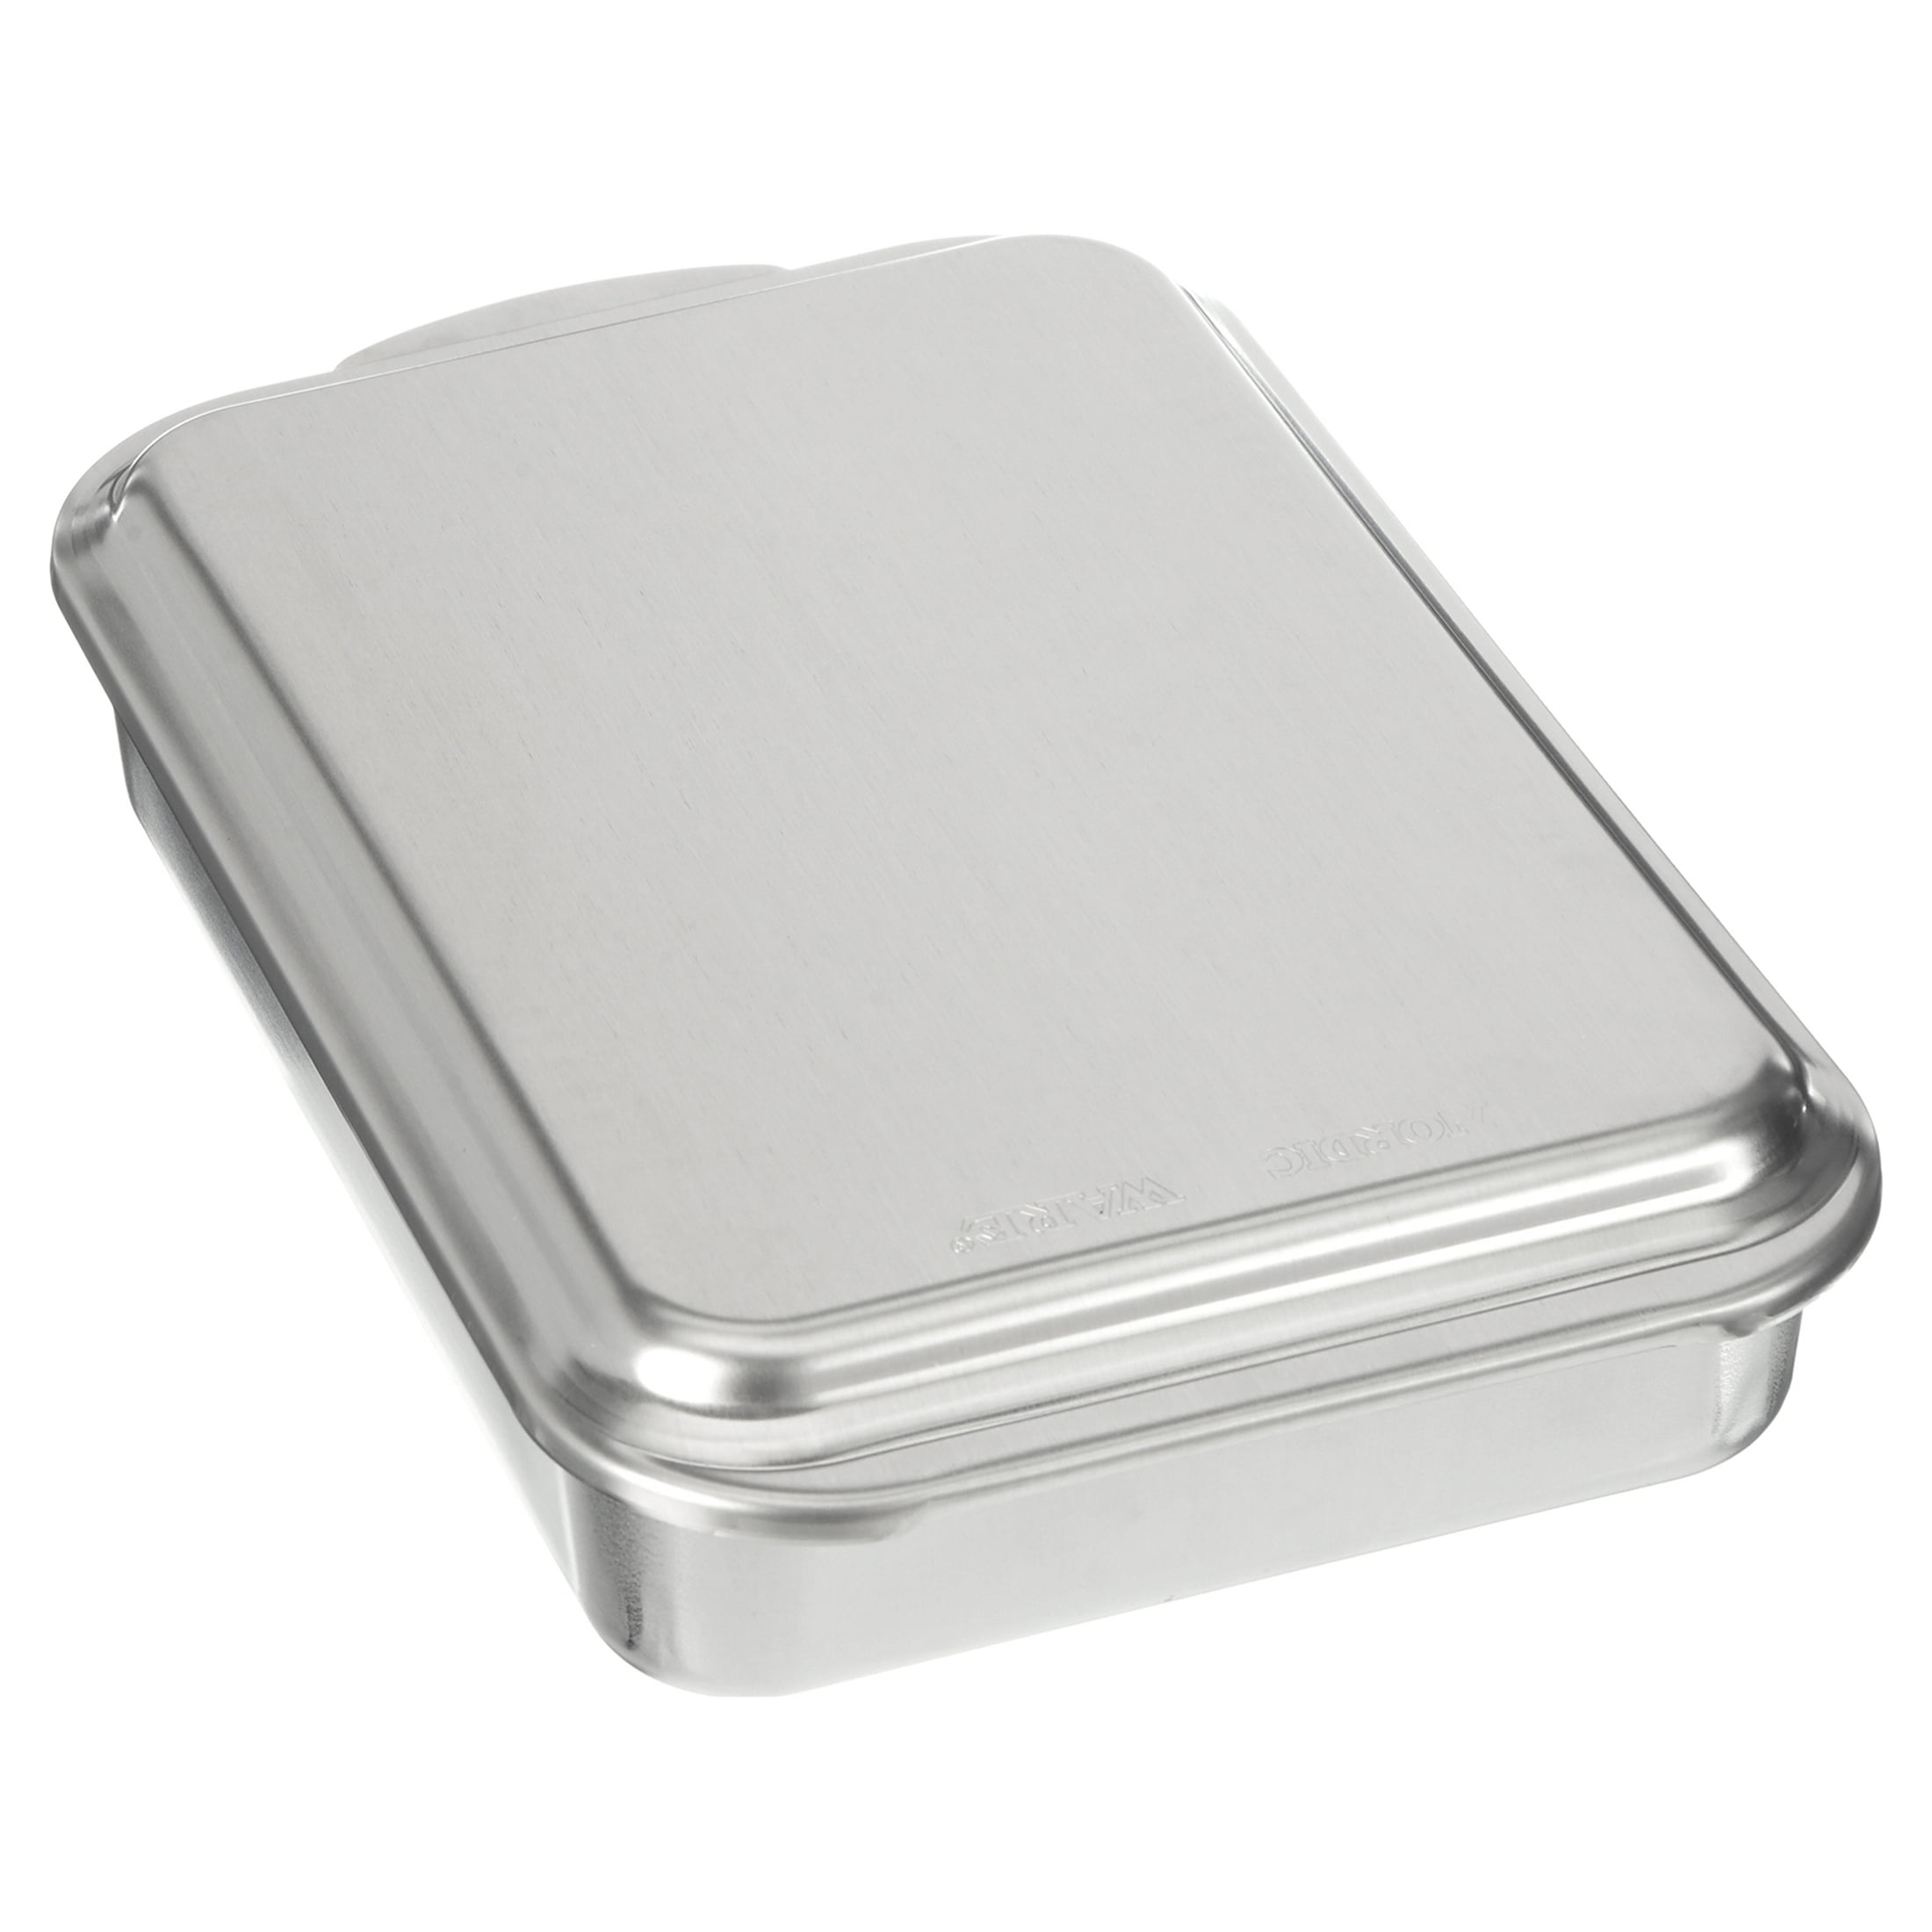 Nordicware Square 9X9 Cake Pan with Storage Lid, Color: Gray